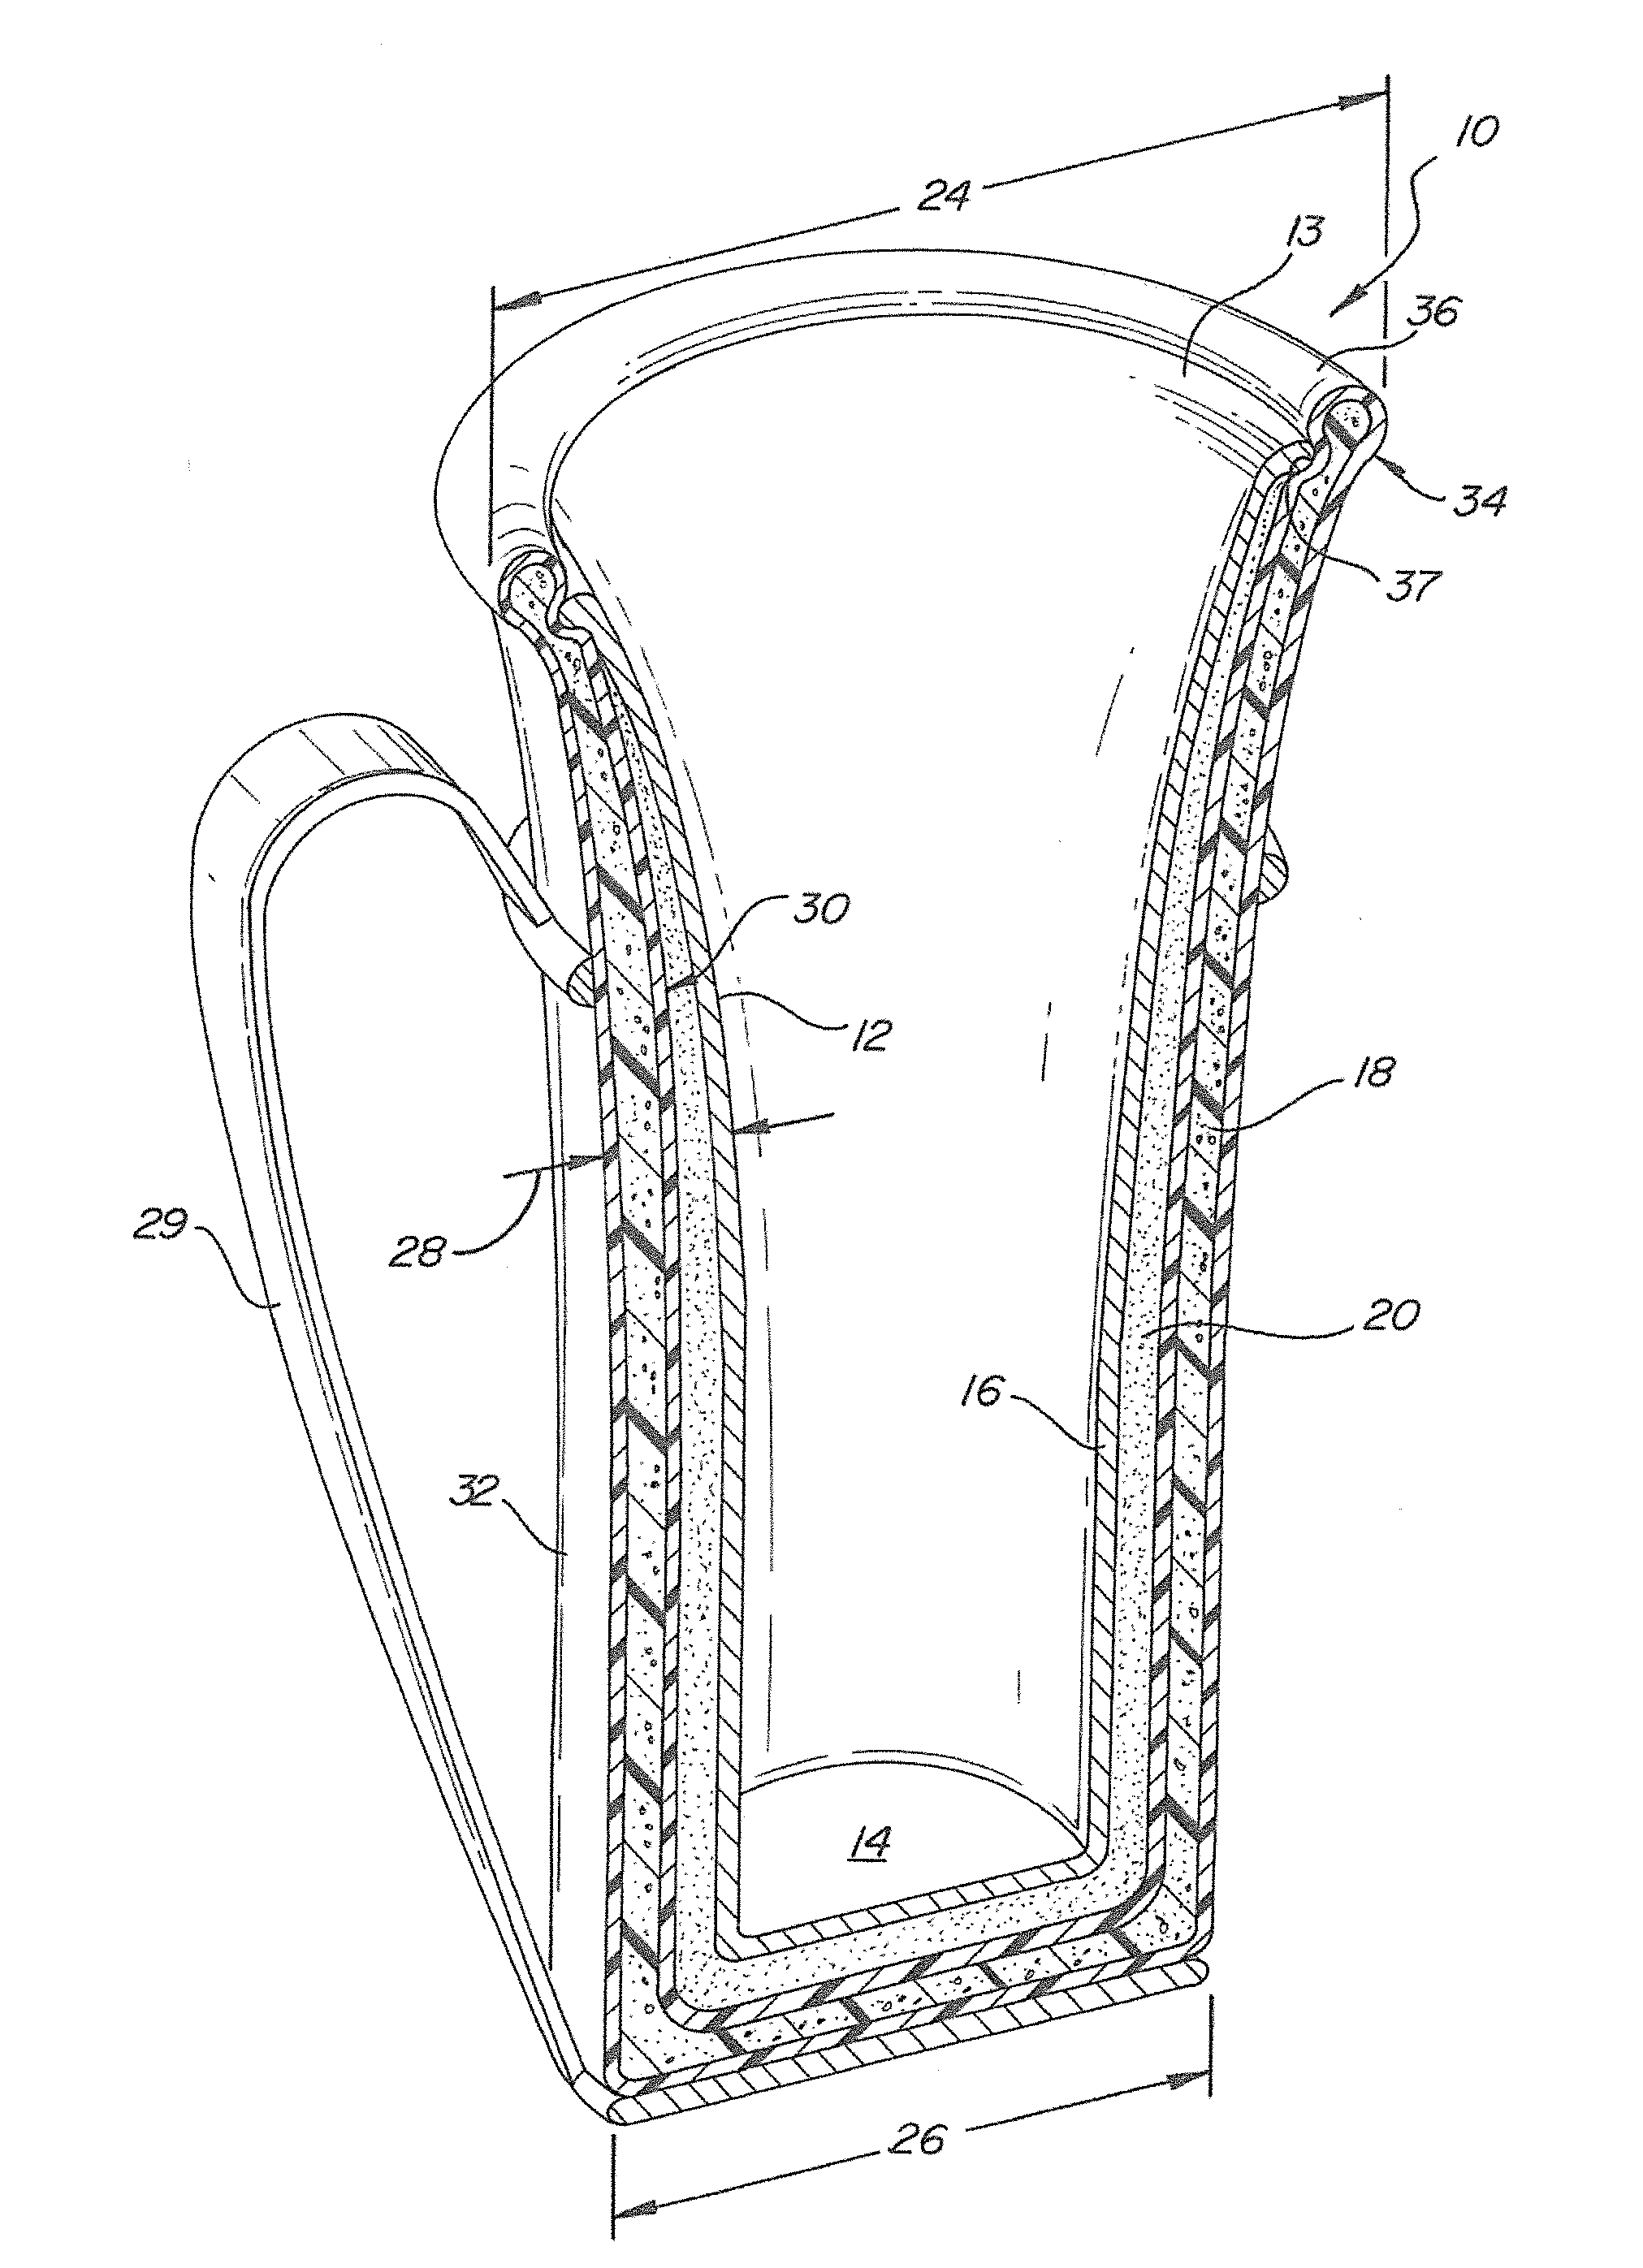 Thermal receptacle with phase change material